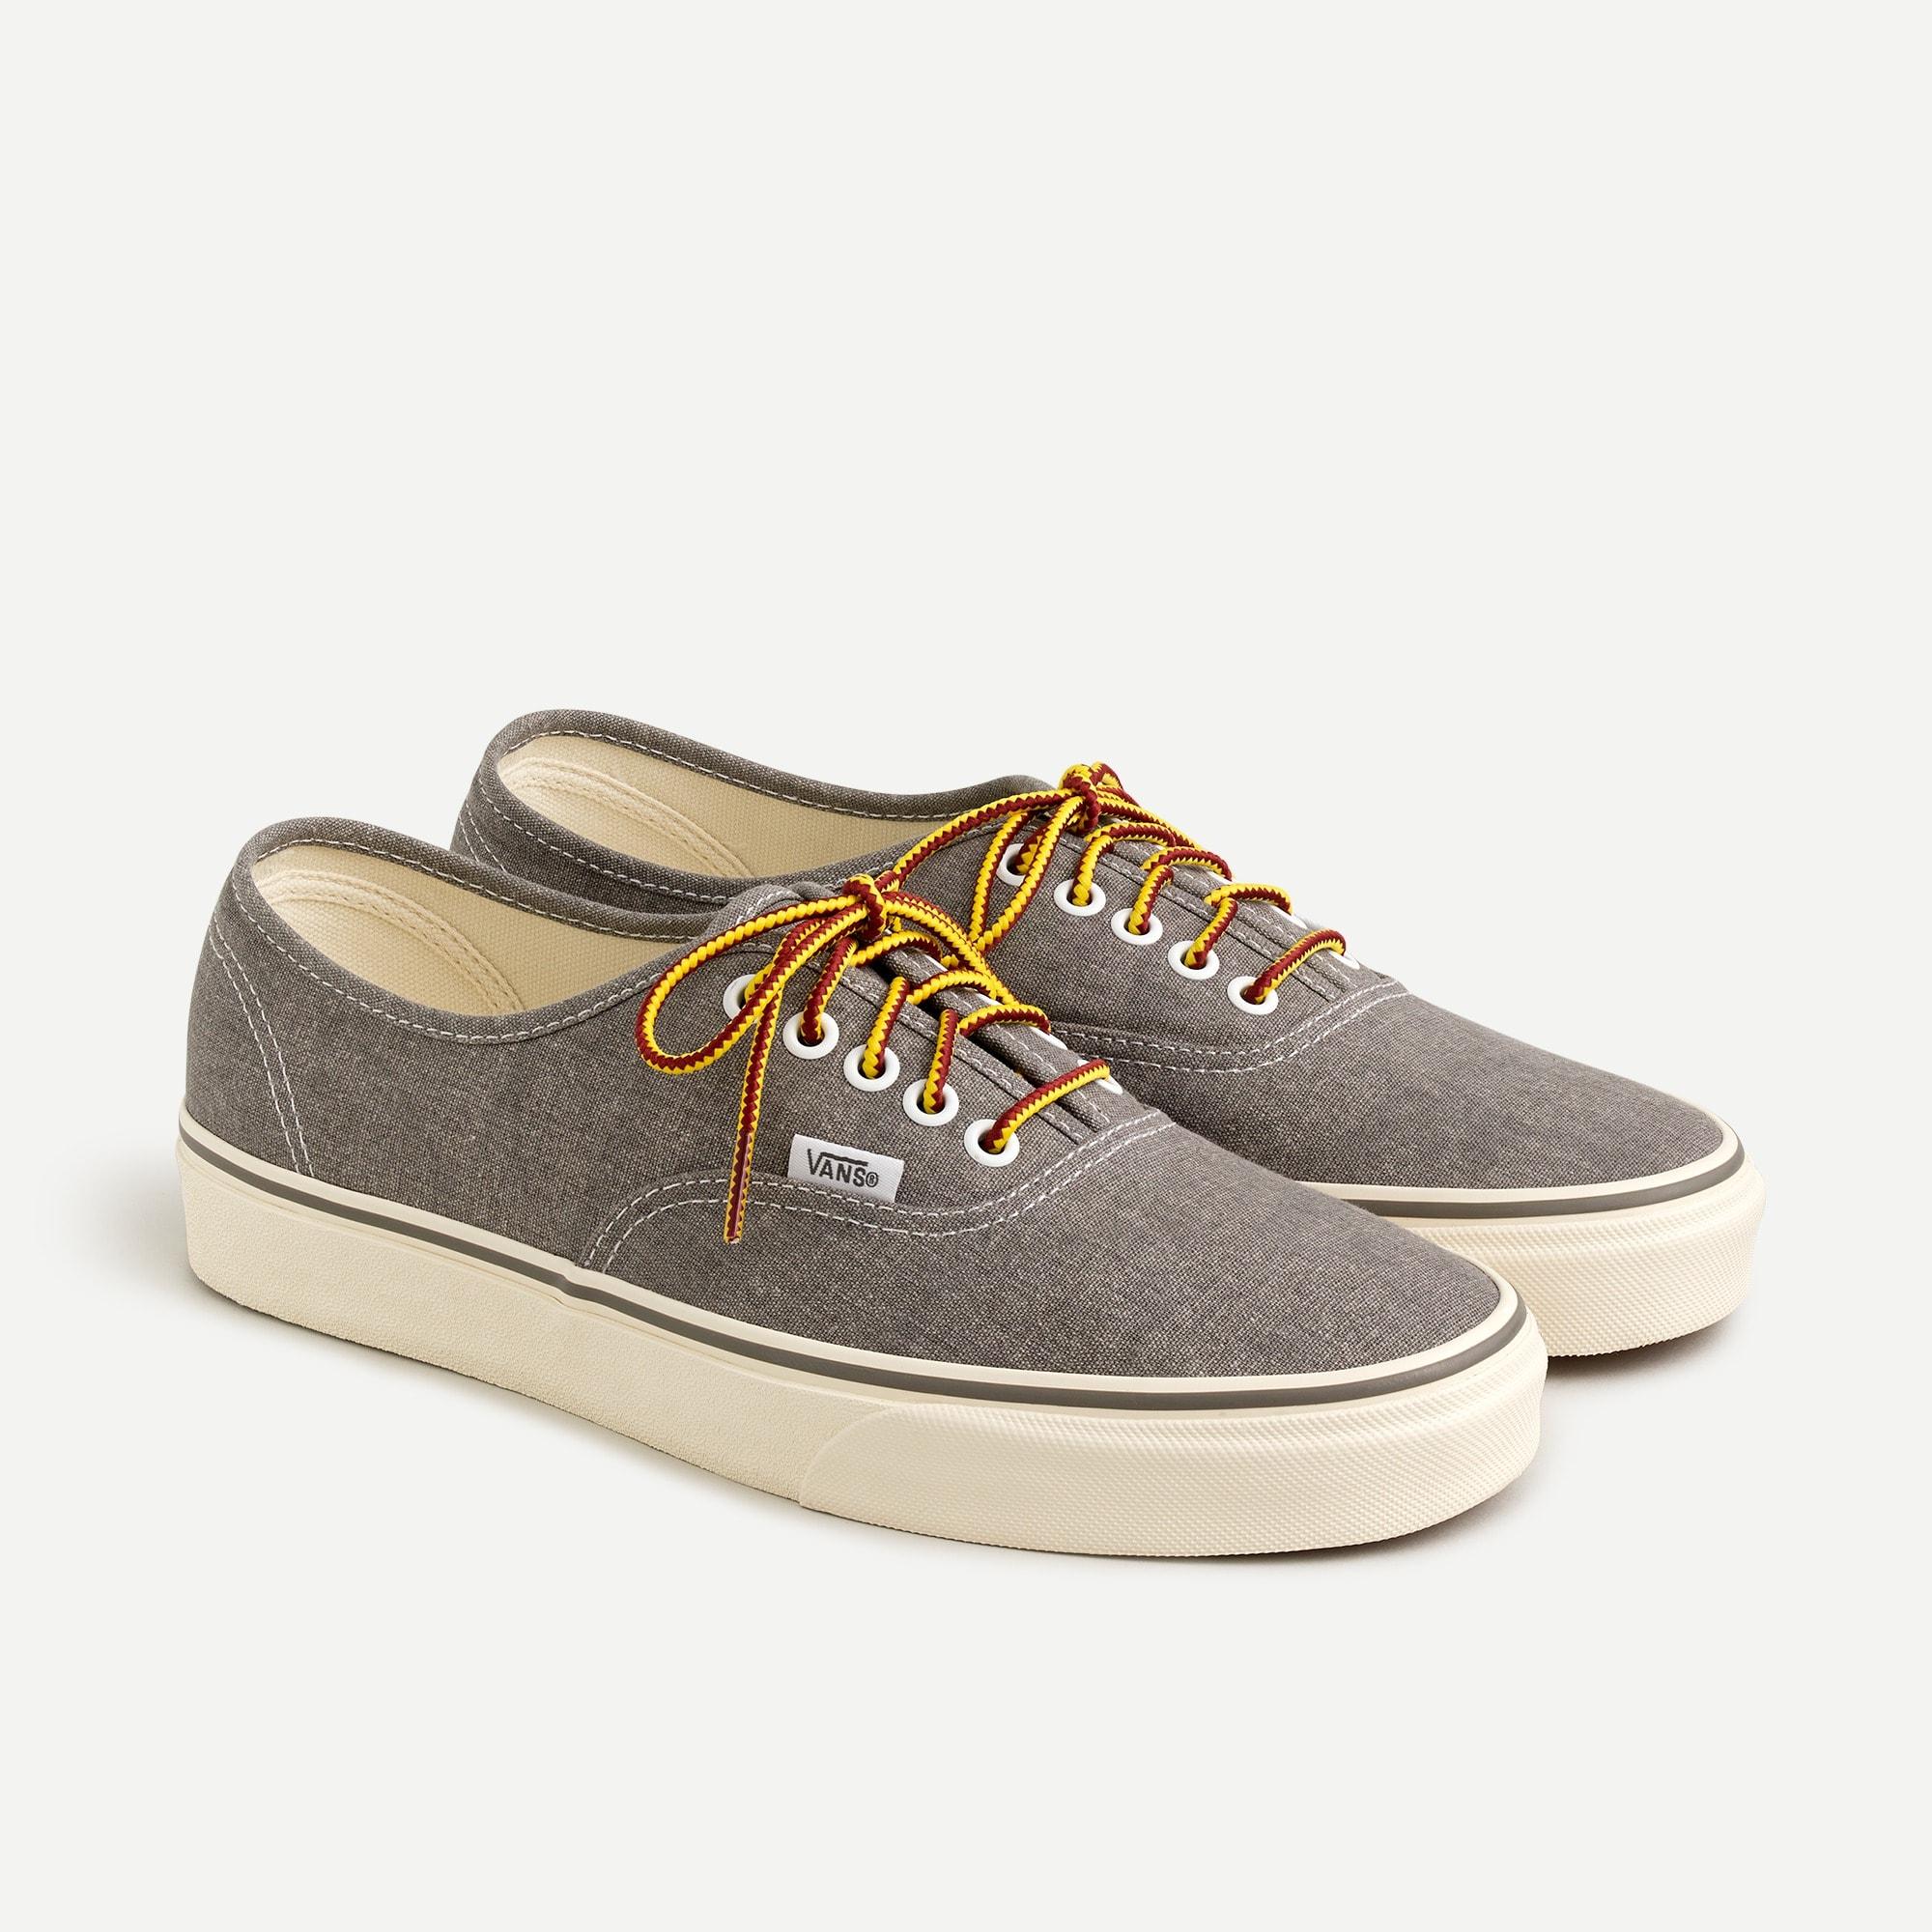 Vans ® For J.crew Washed Canvas Authentic Sneakers in Metallic | Lyst